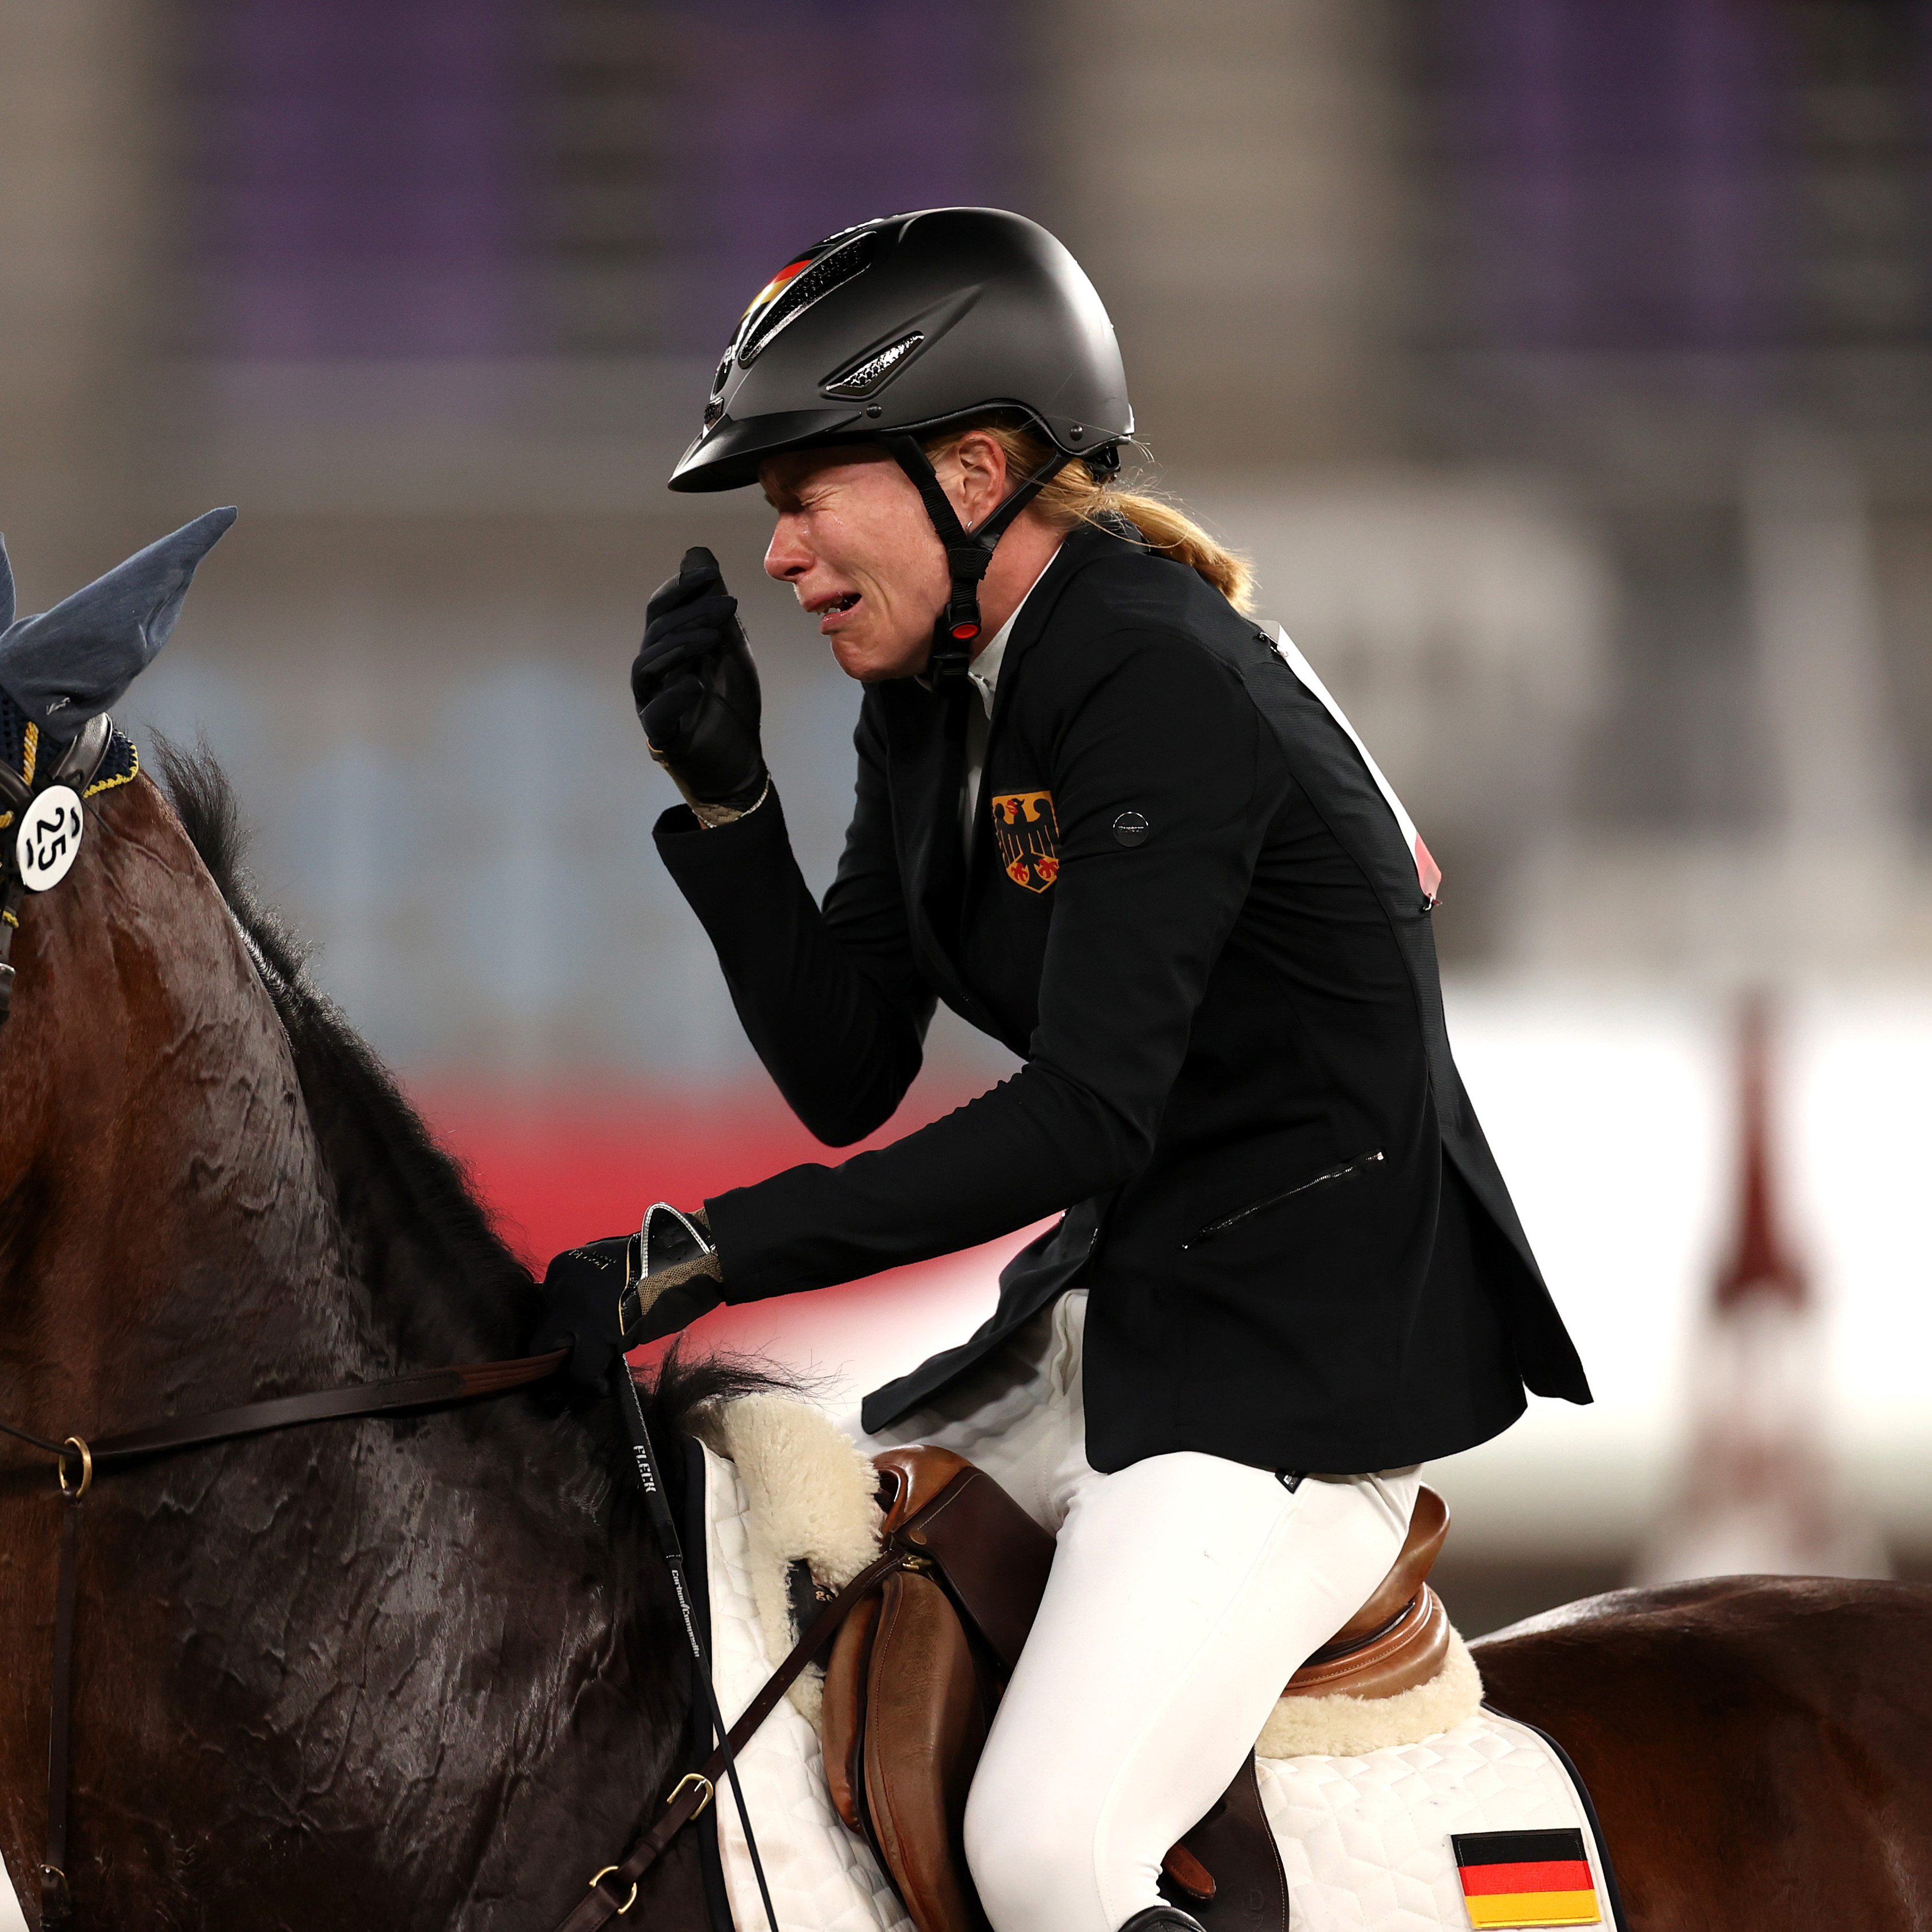 German pentathlete sobbing as she misses out on gold because her horse wouldnt jump is what the Olympics are all about This is the Loop GolfDigest